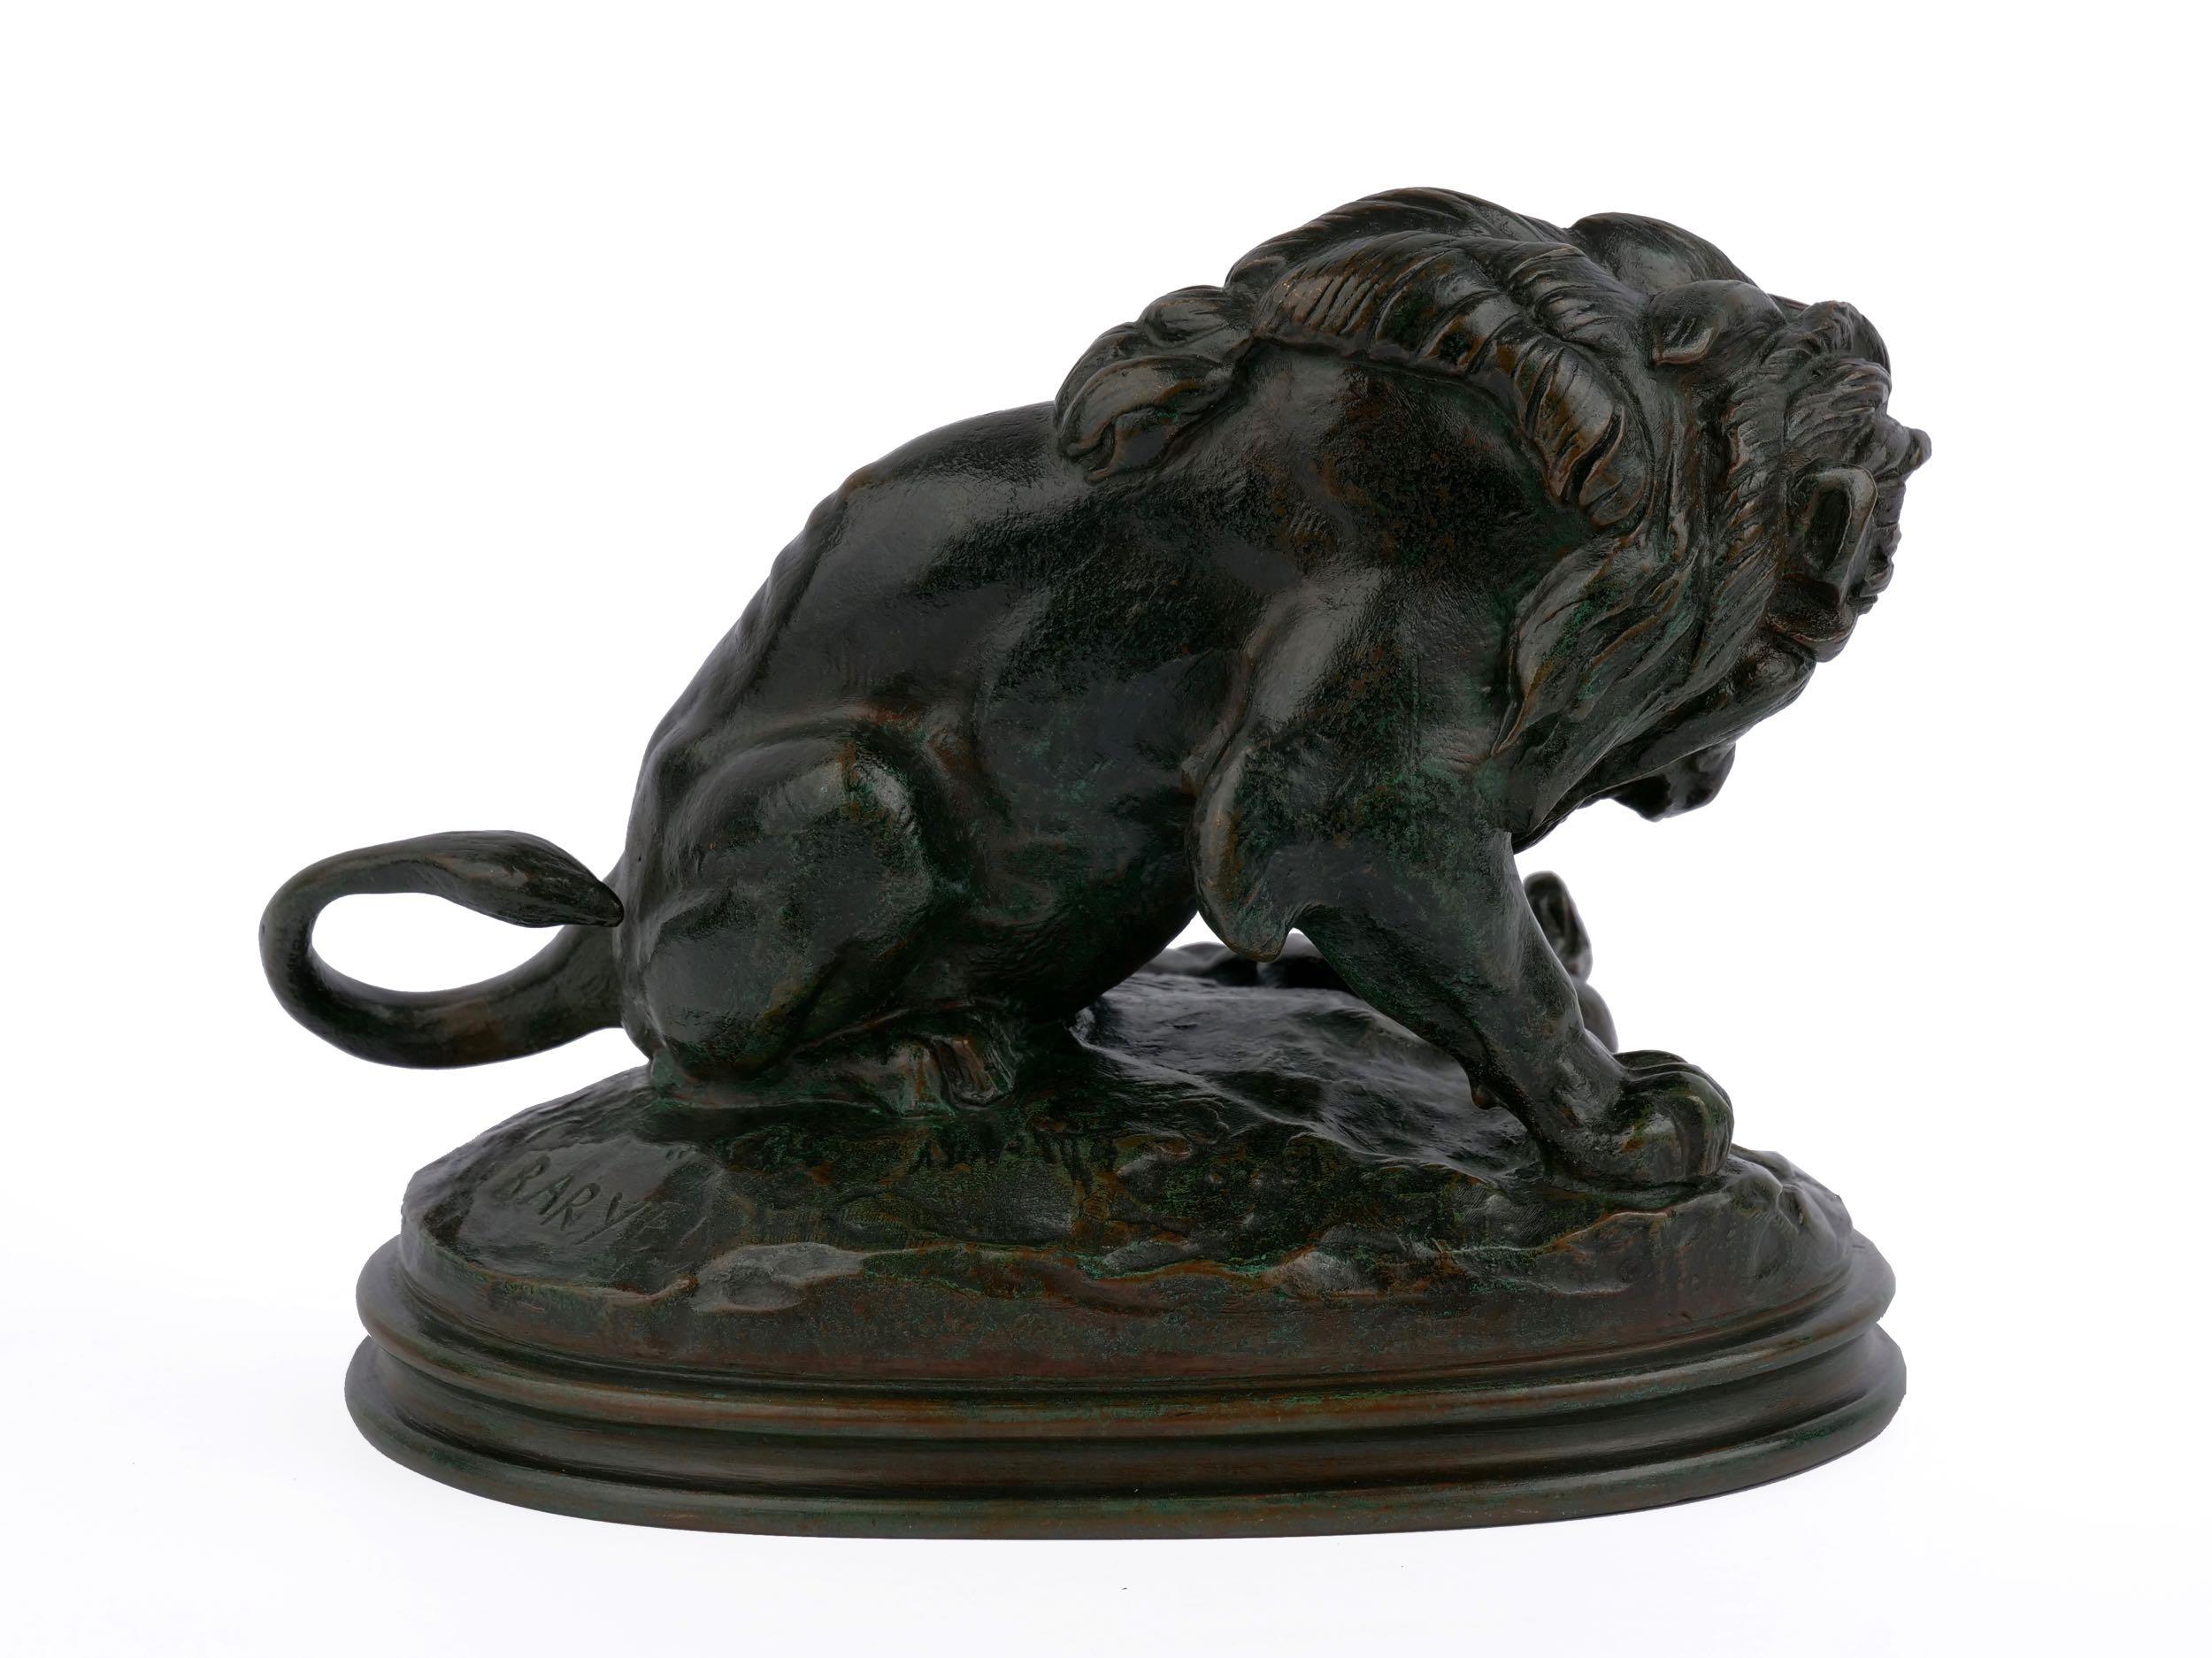 Barye’s lion crushing a serpent helped establish his reputation when he presented the work as a plaster model at Salon in 1833 along with nine other works. This exhibition was particularly interesting in the sheer range of work he presented, from